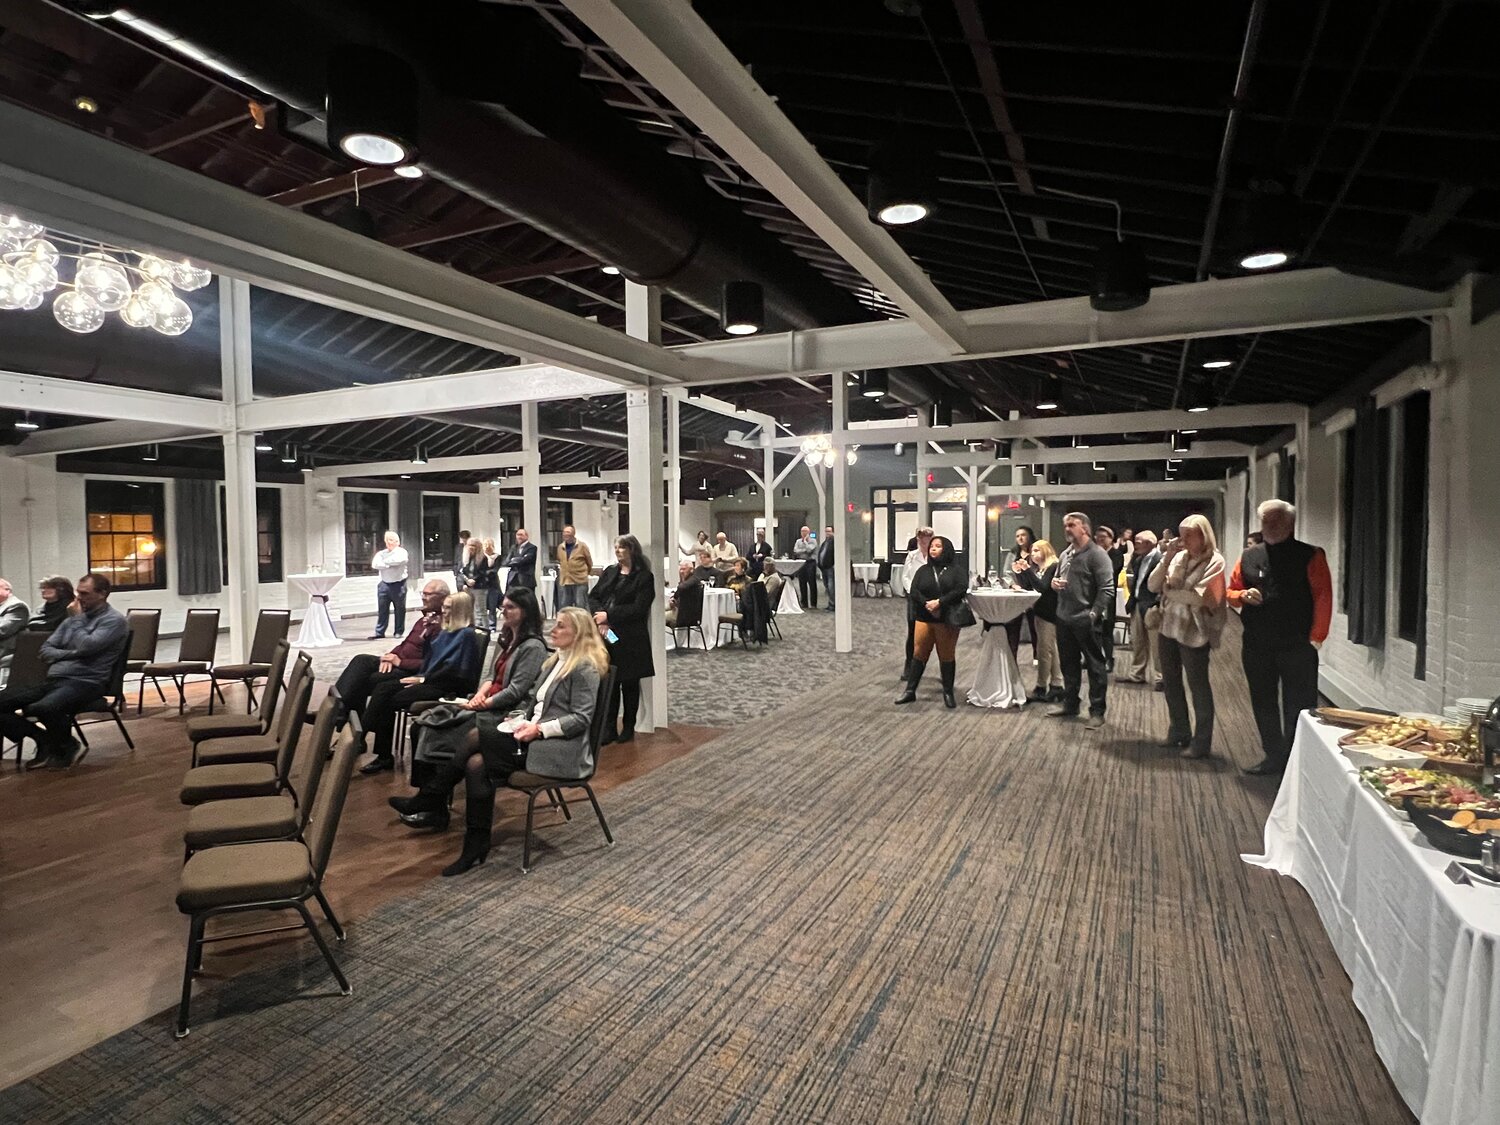 A crowd of current and former City of Hastings officials, councilmembers, HEDRA commissioners and grant partners attended a celebration of development of The Confluence in downtown Hastings Thursday night.